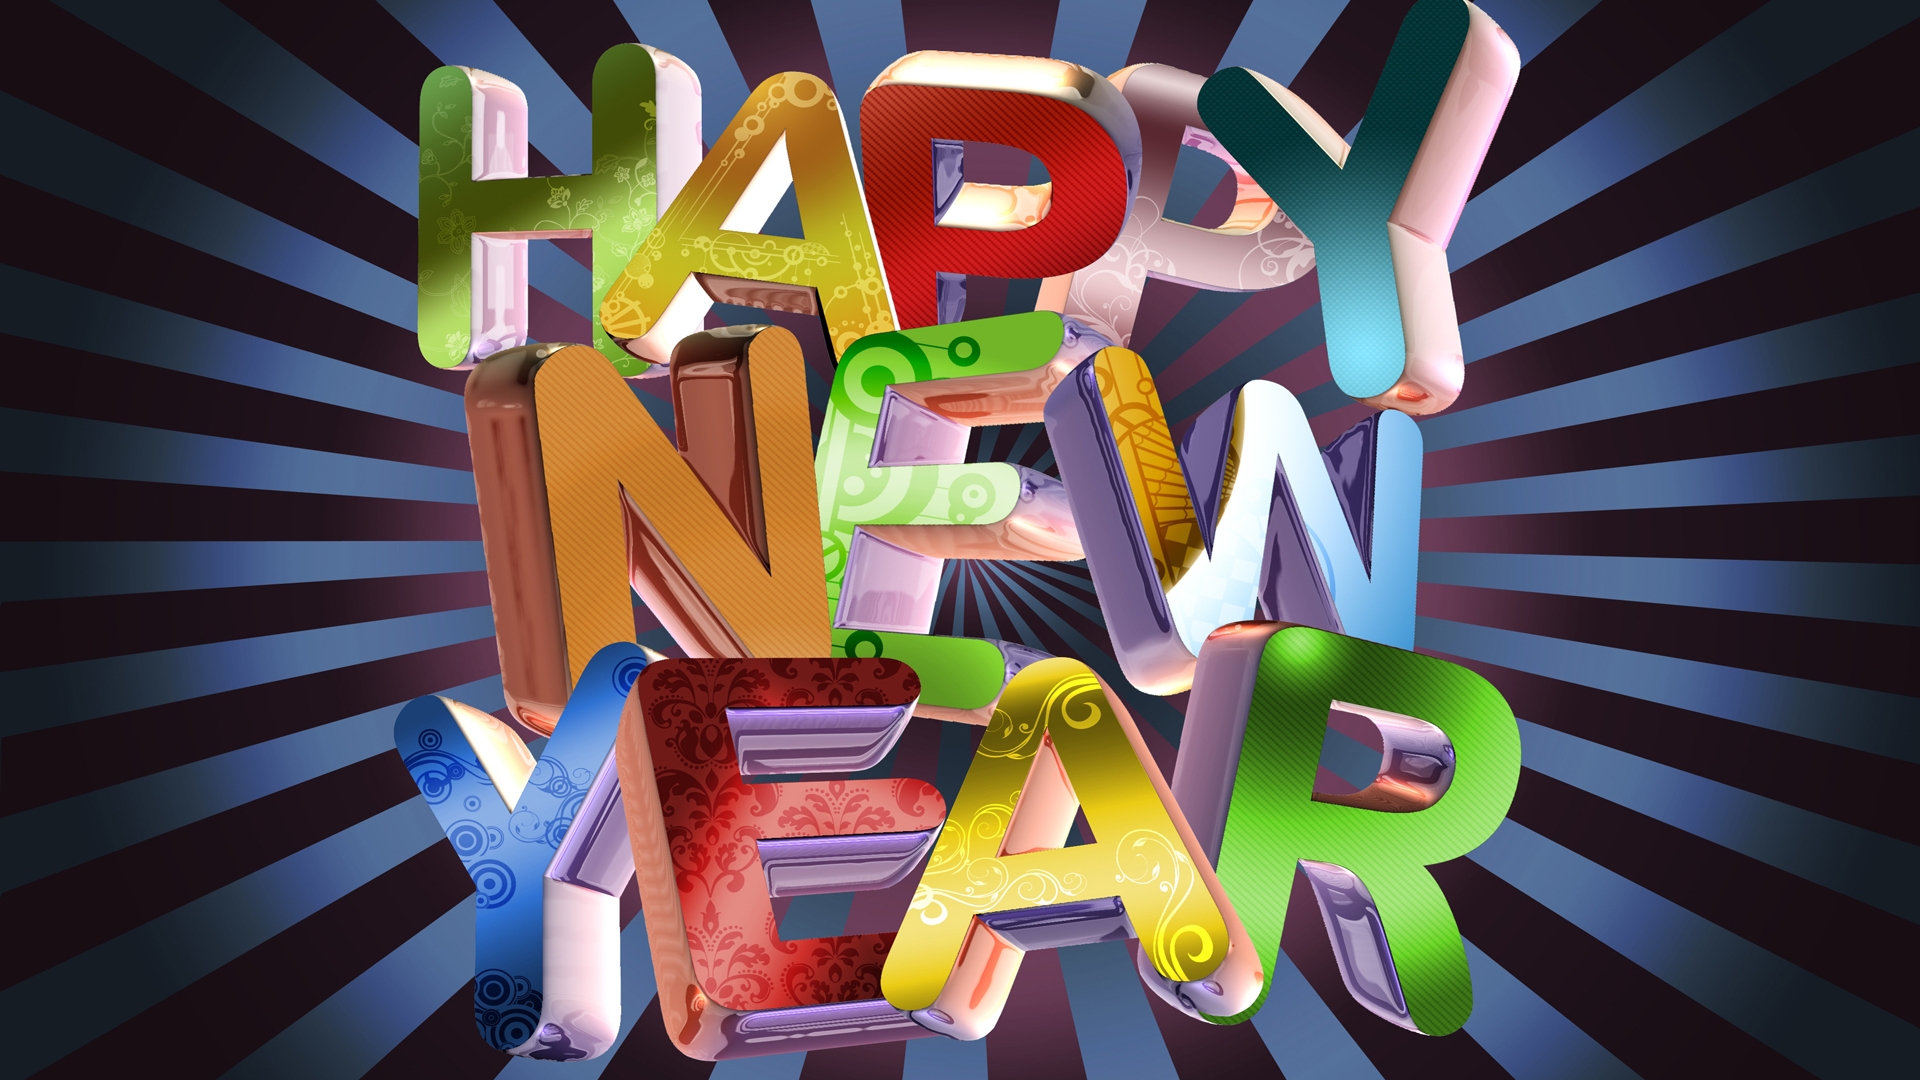 Happy New Year for 1920 x 1080 HDTV 1080p resolution